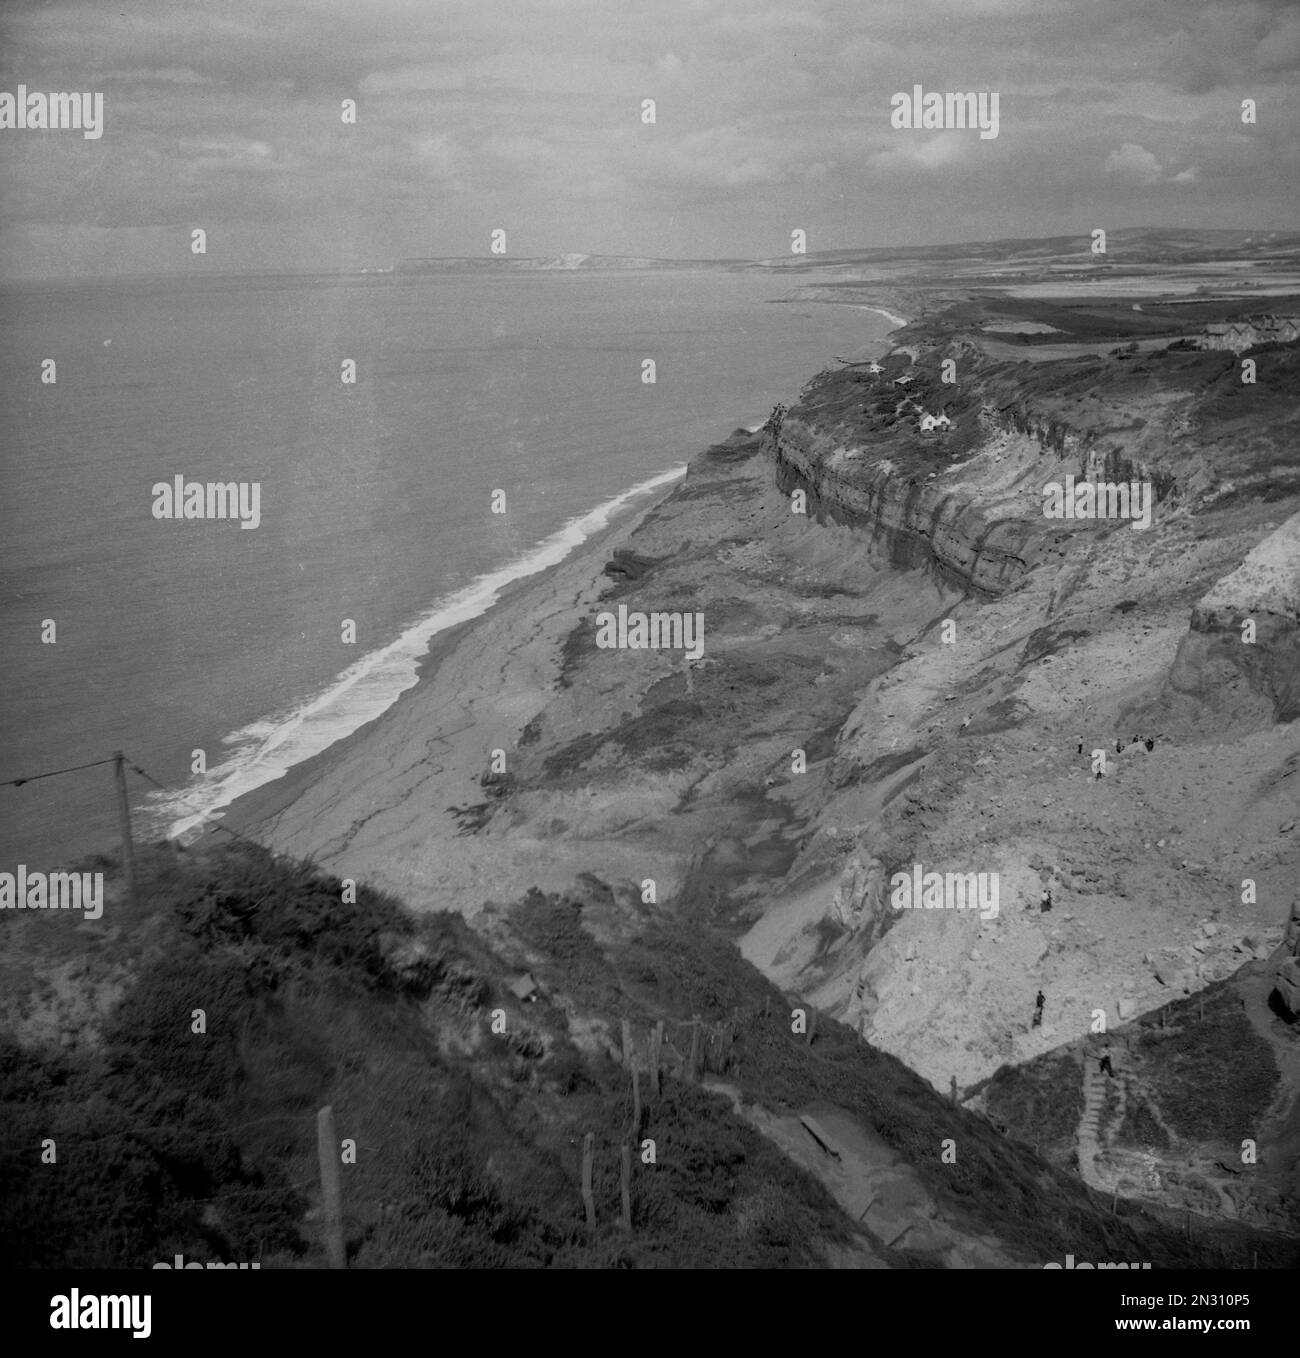 1950s, historical, view from above, of the beach and coast at Blackgang Chine, Ventor, Isle of Wight, England, UK. The area has seen significant coastal erosion over the past decades. Stock Photo